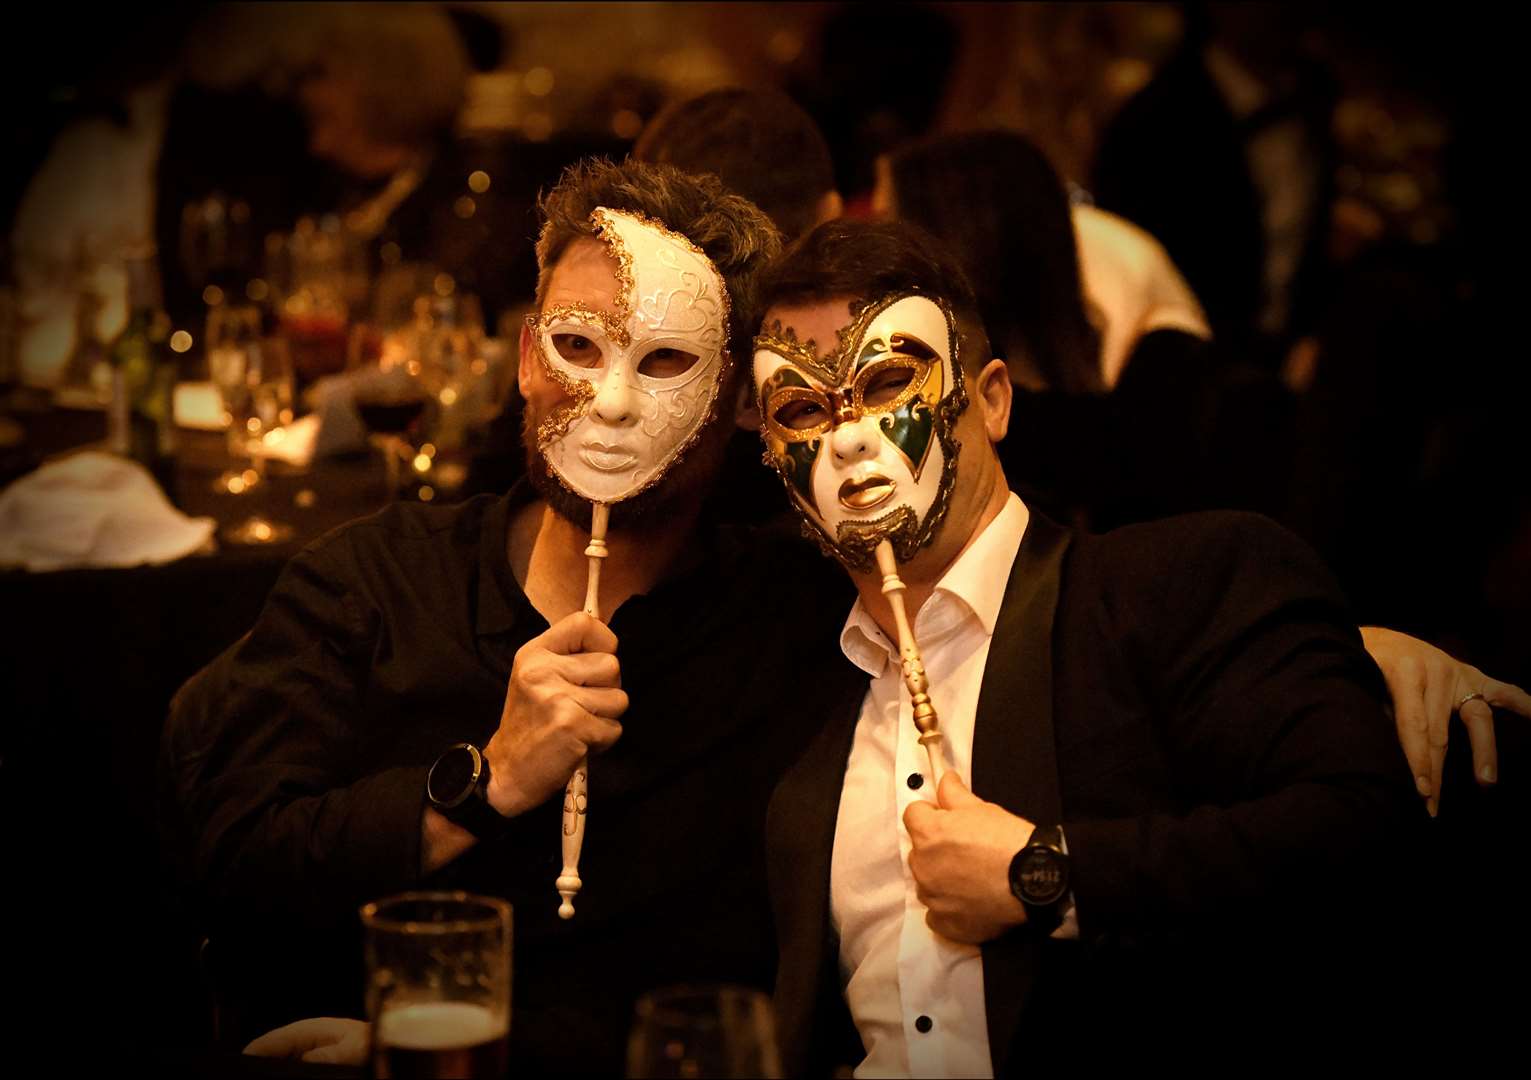 Over a hundred people turned up to the event dressed in spectacular masks.